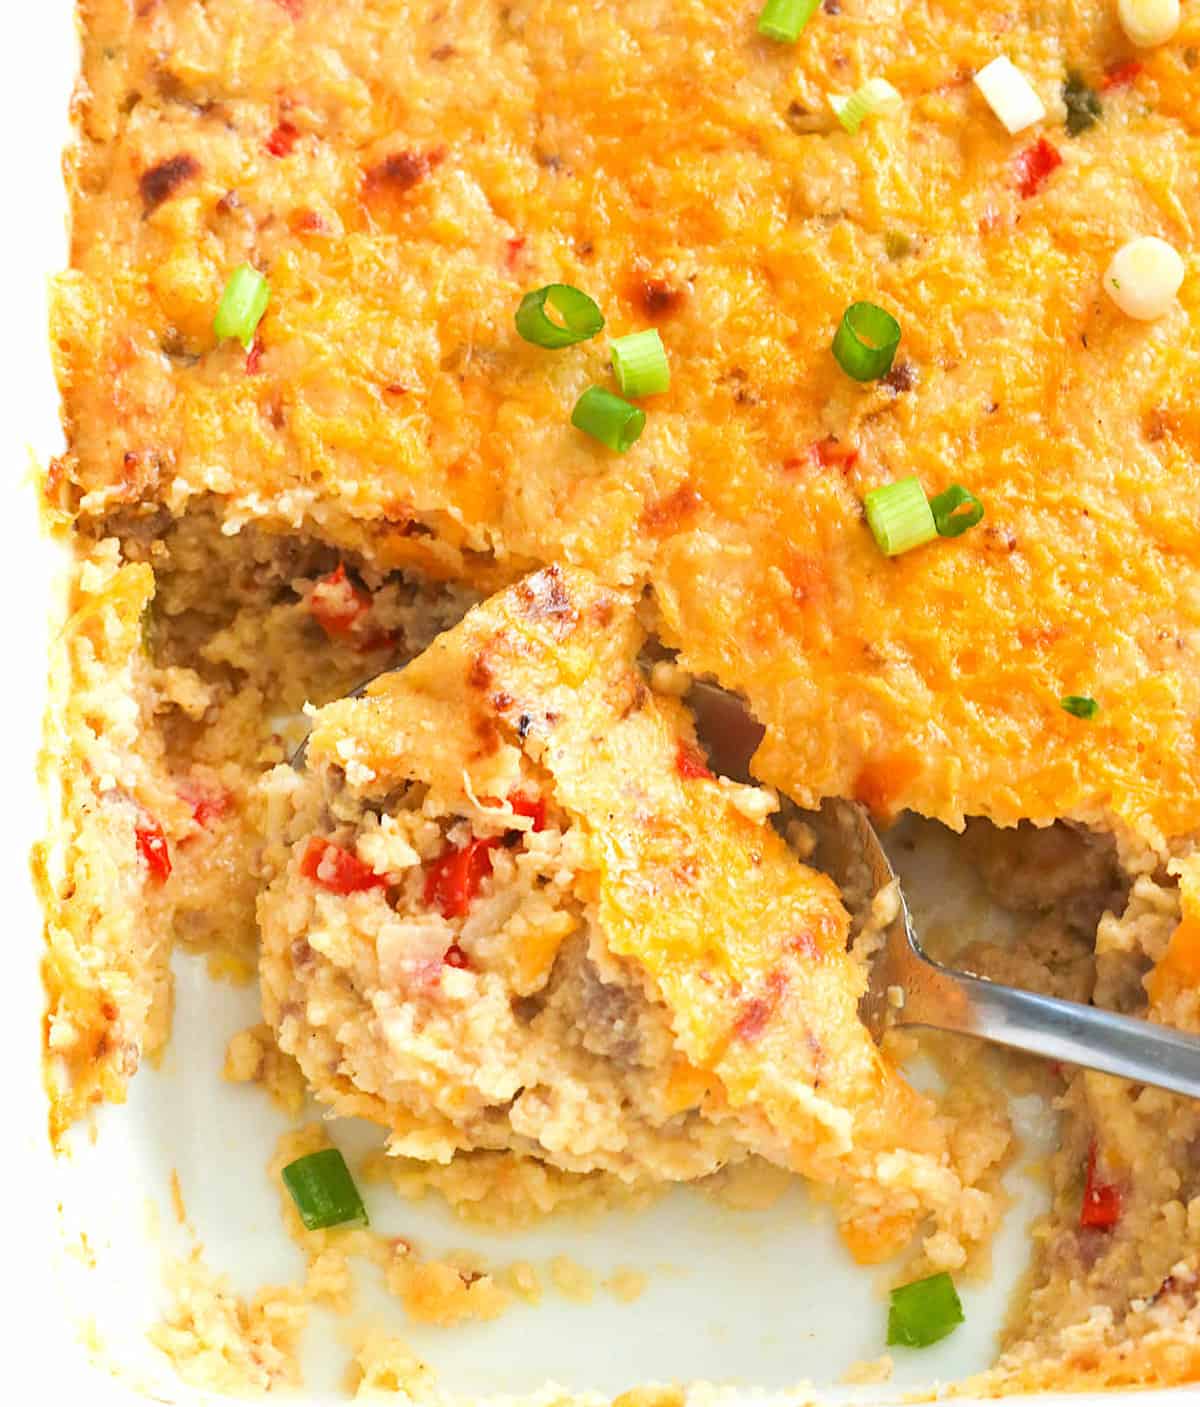 Gratefully serving cheesy grits casserole